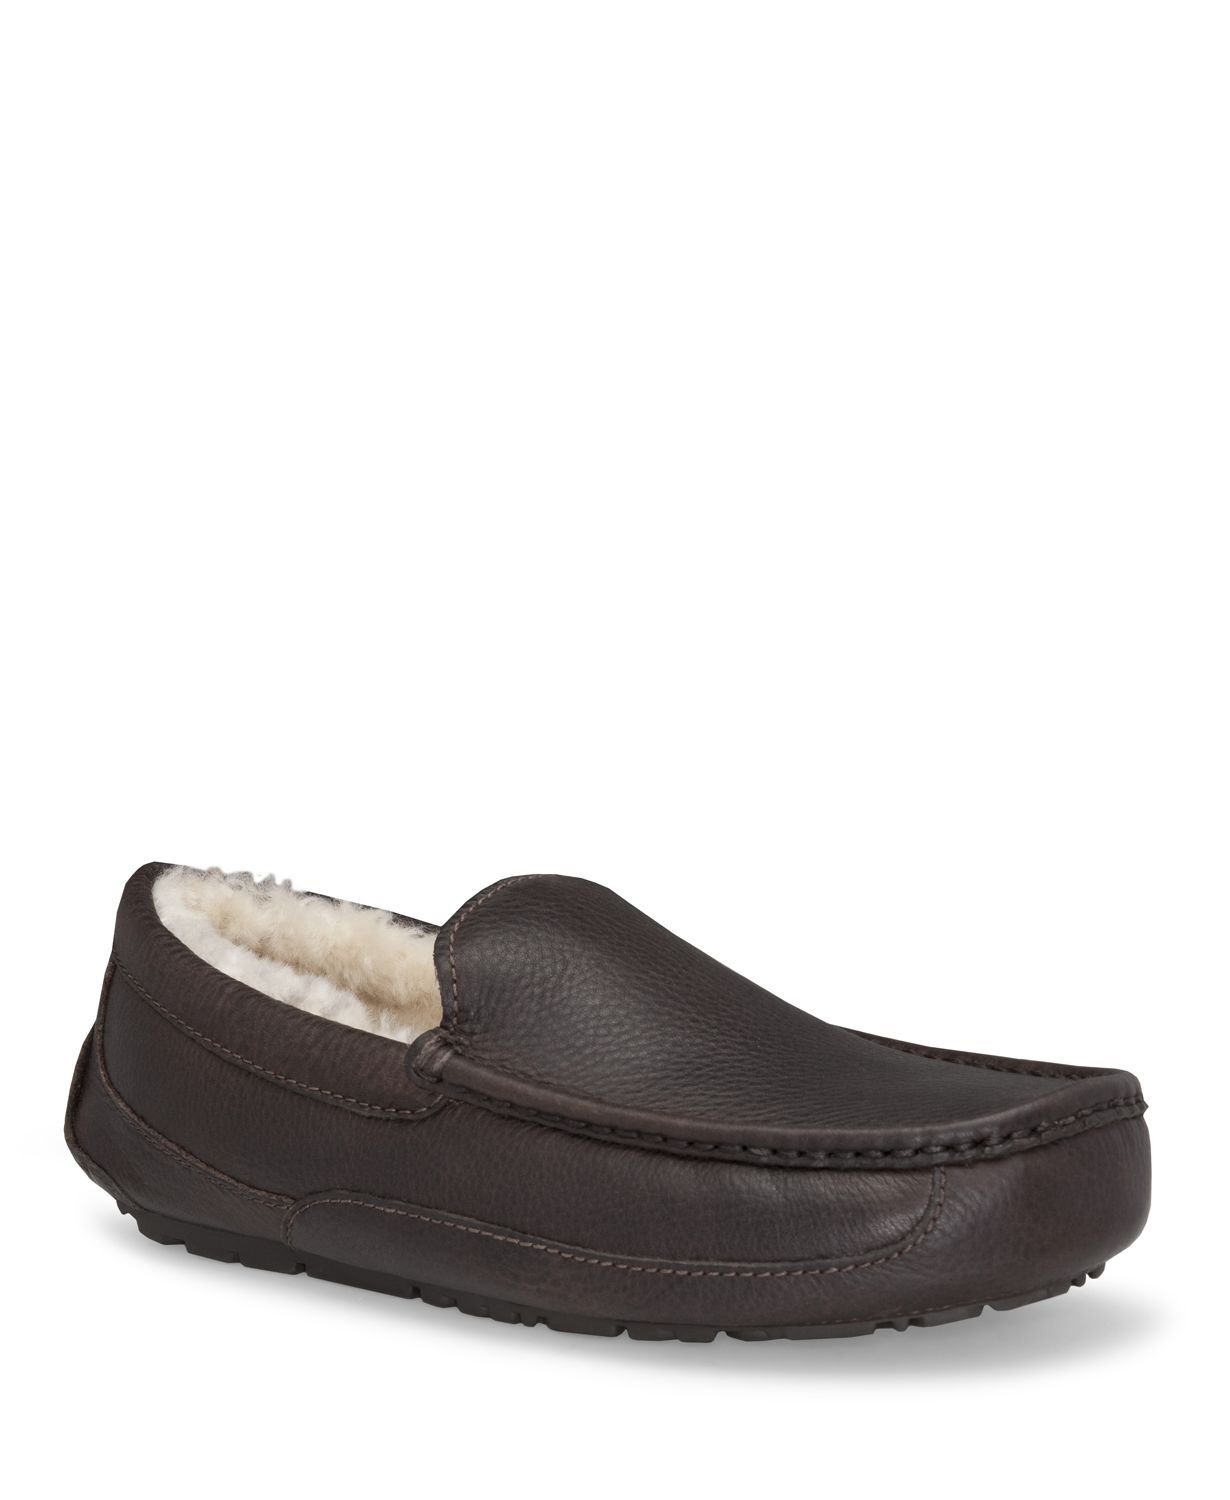 mens leather slippers with sheepskin lining